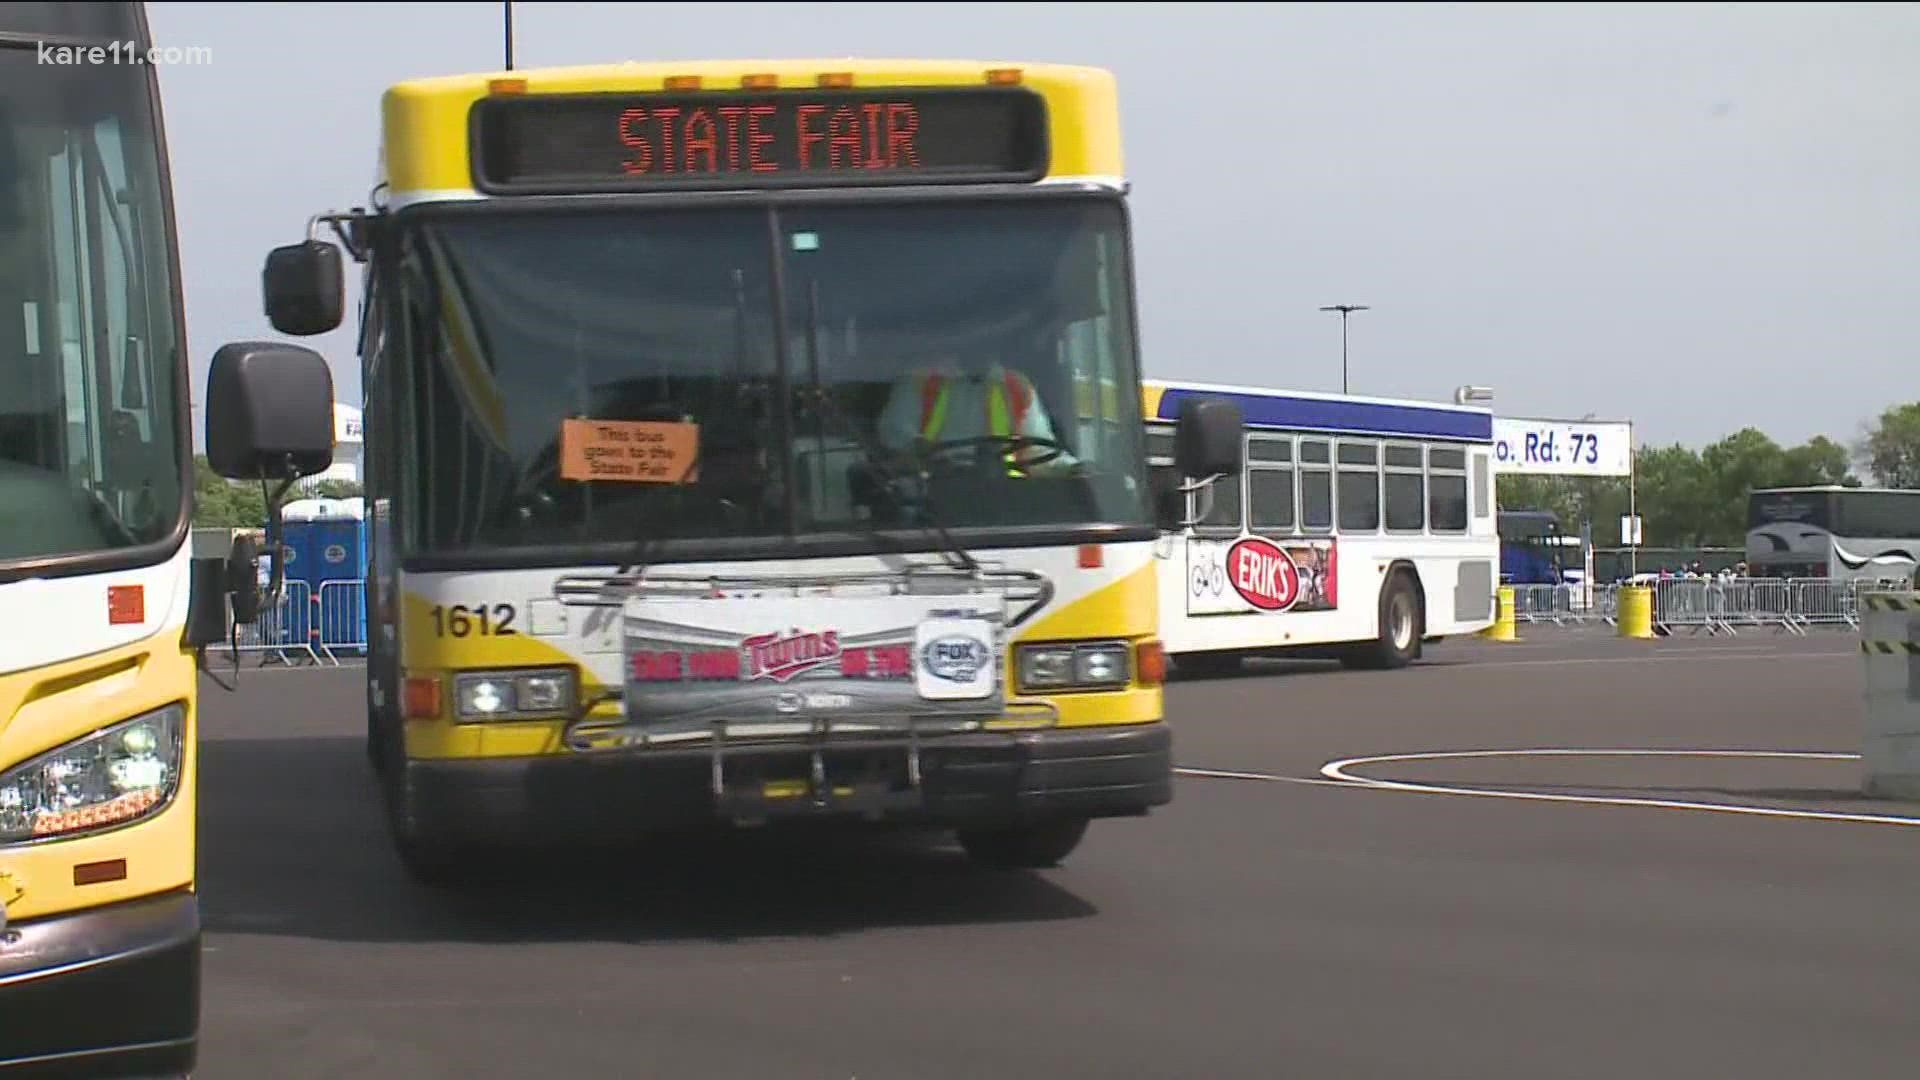 Metro Transit typically provides 10 pickup locations for the fair across the metro, but a bus driver shortage is constraining this year to three.